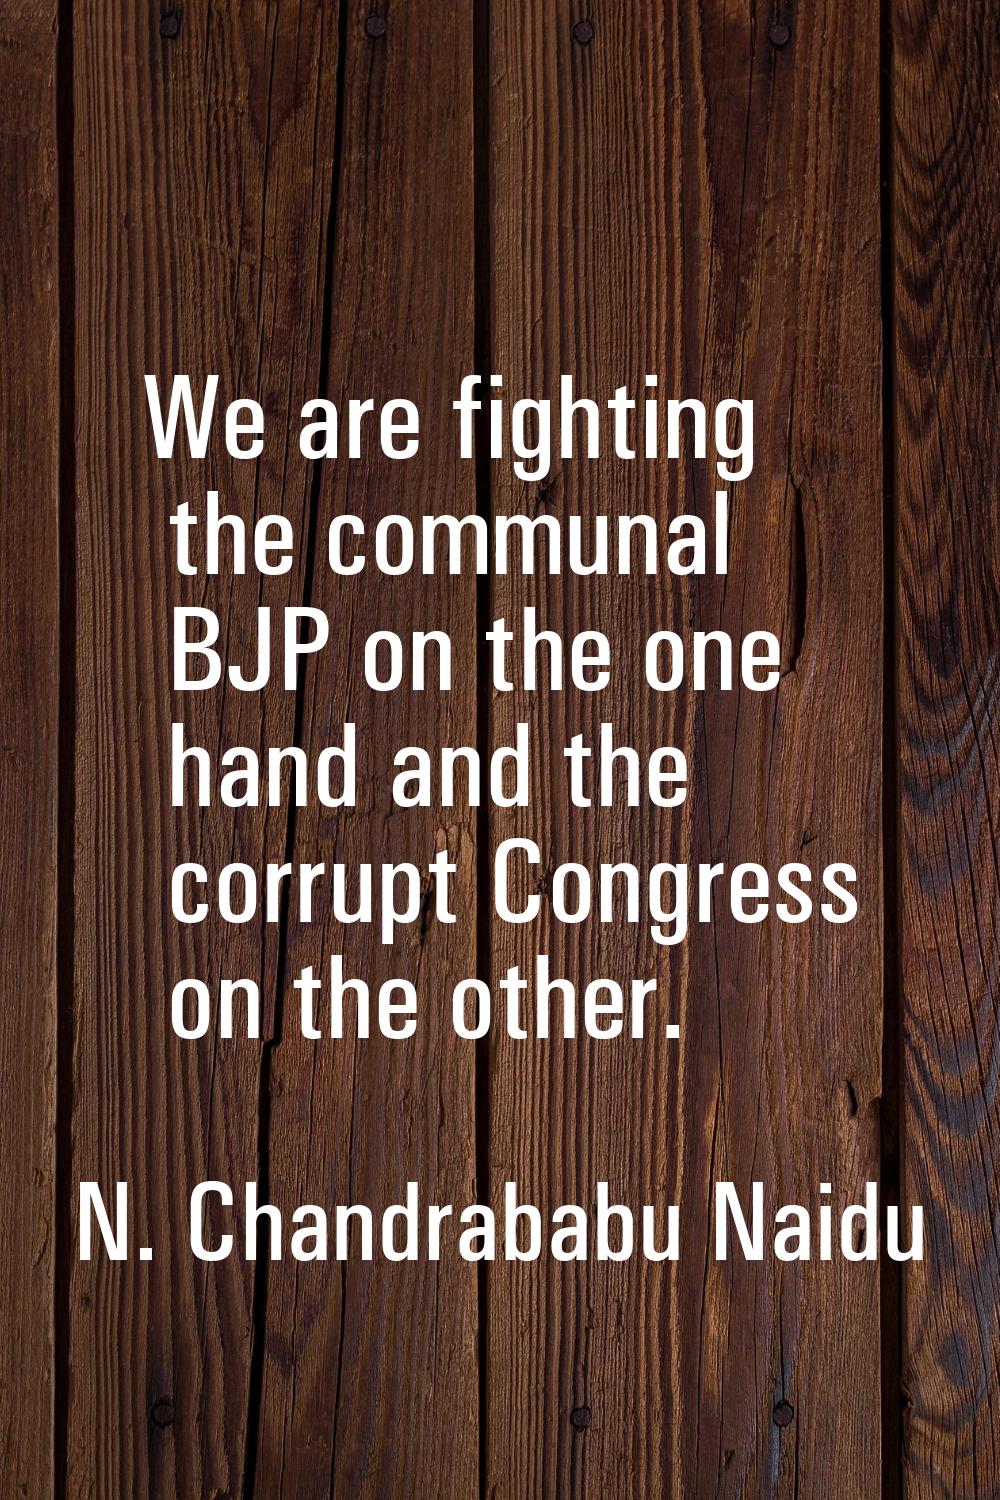 We are fighting the communal BJP on the one hand and the corrupt Congress on the other.